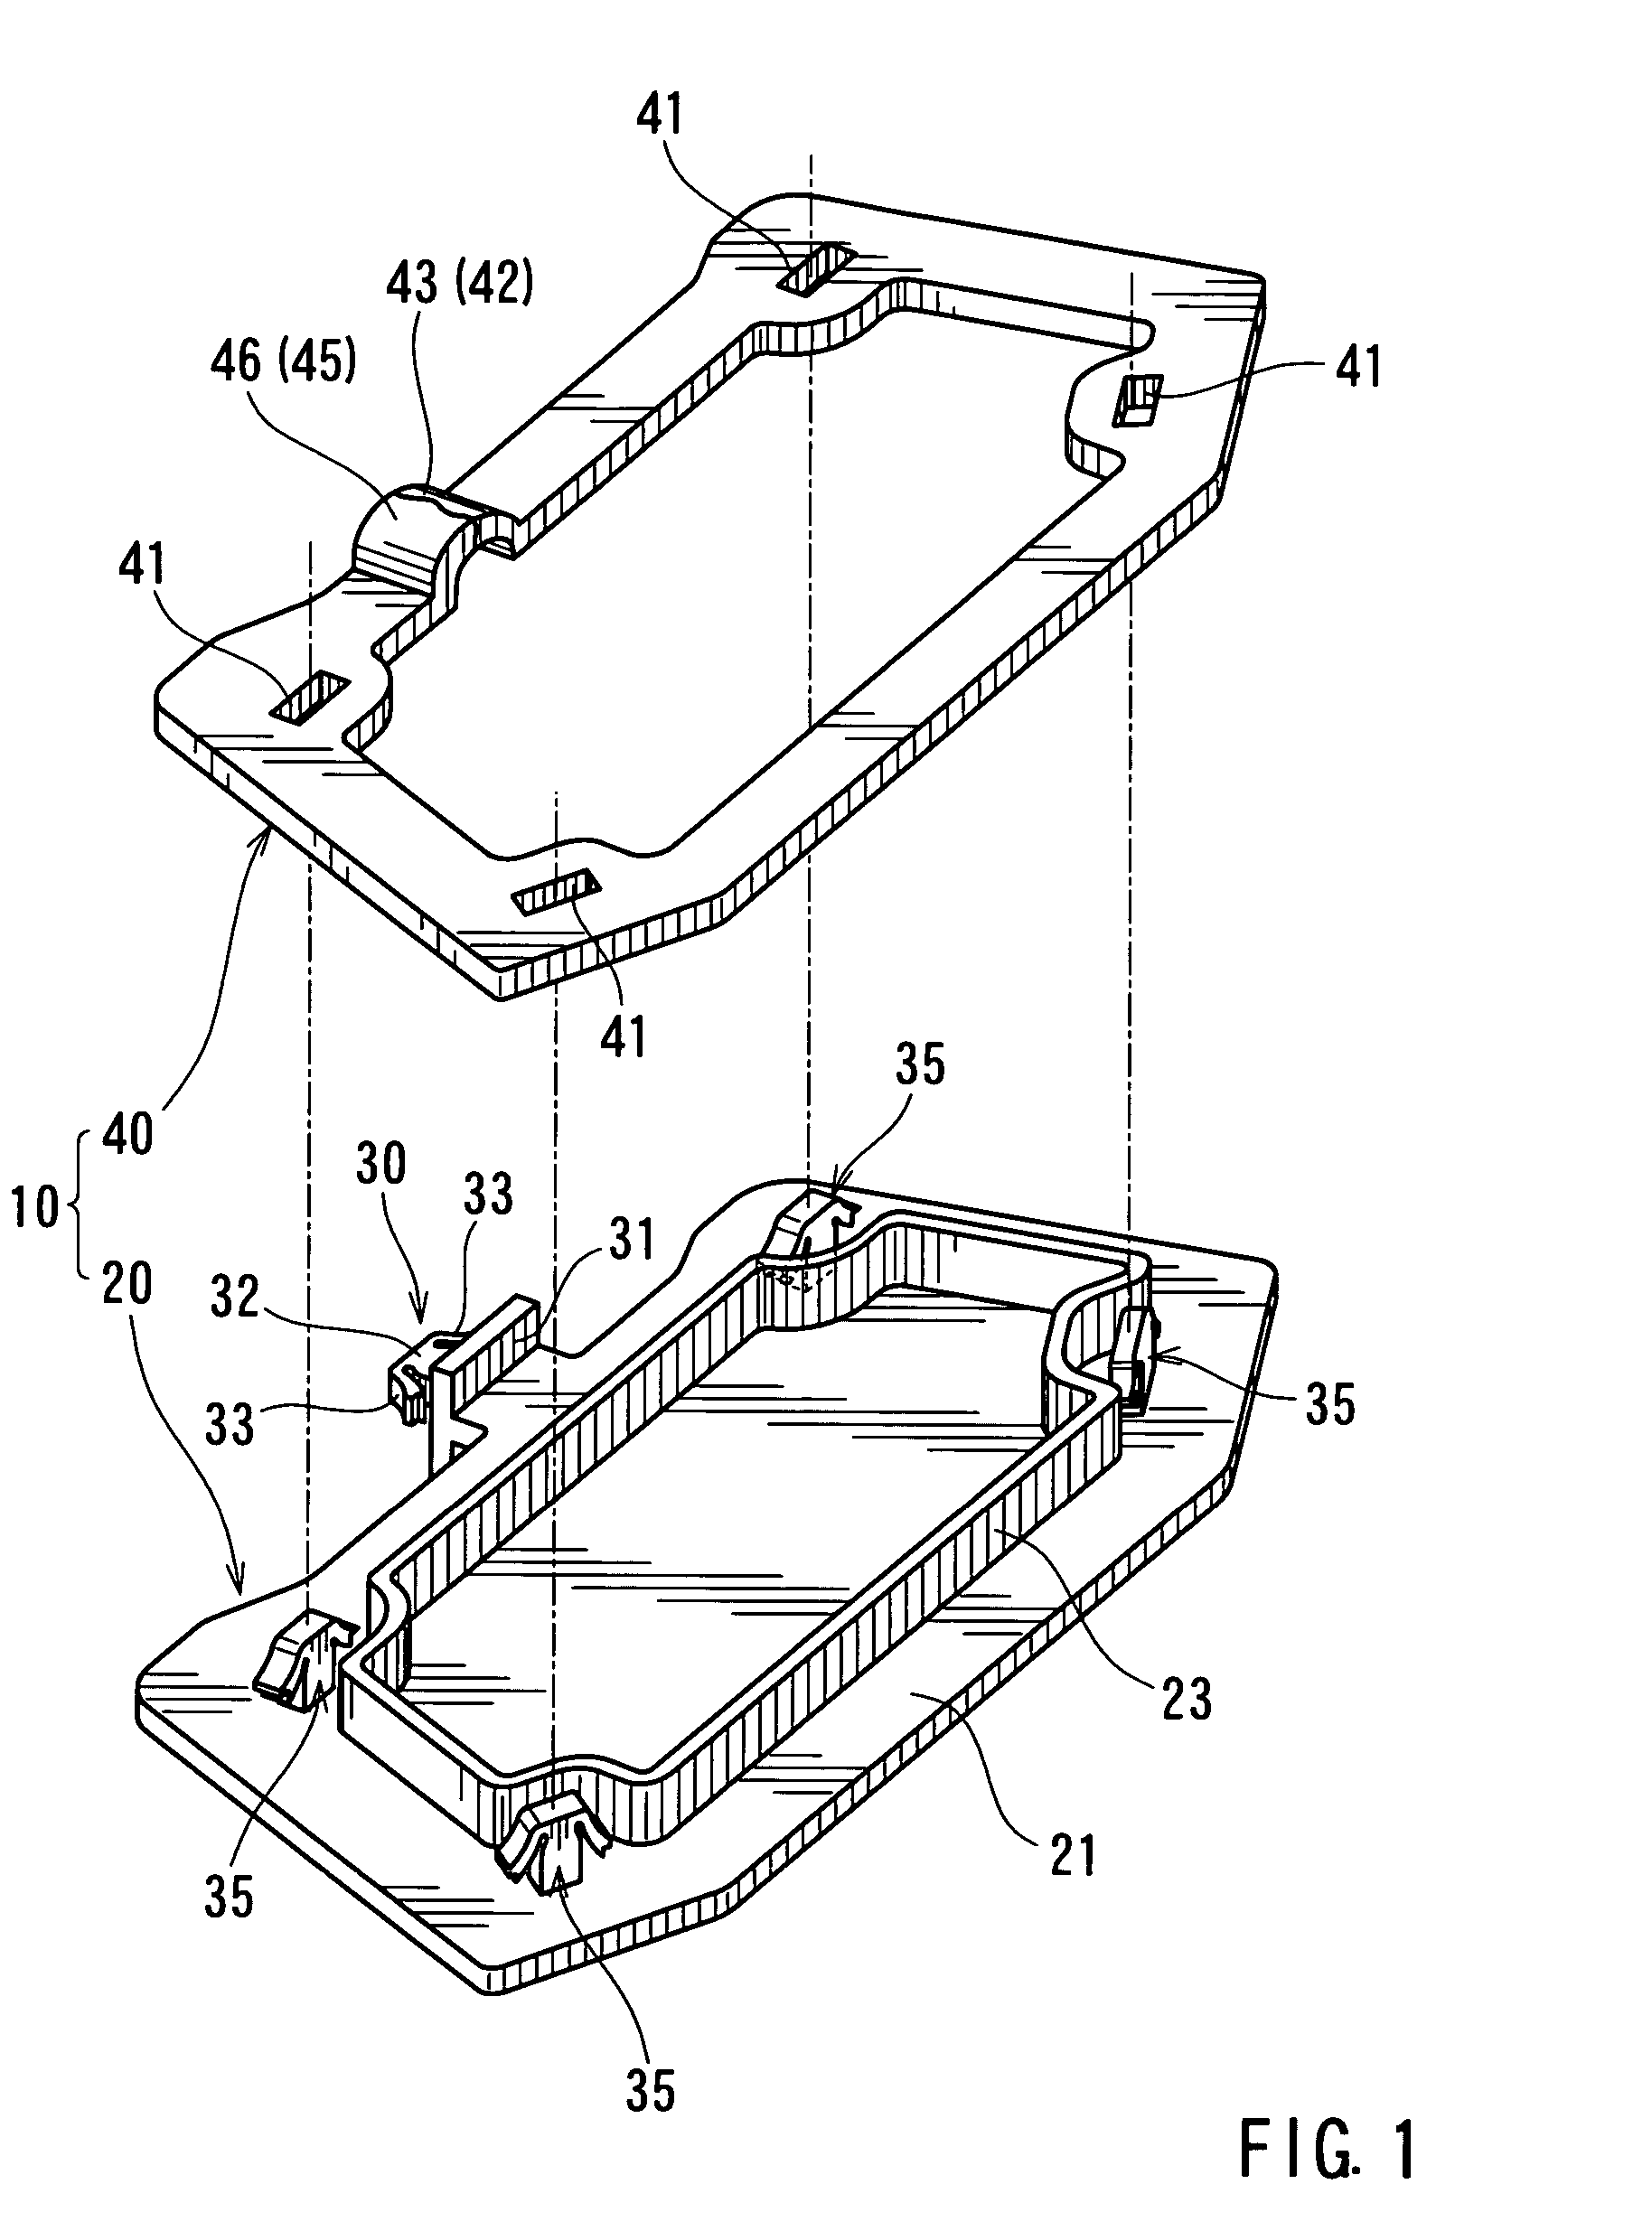 Blocking devices for hollow structures